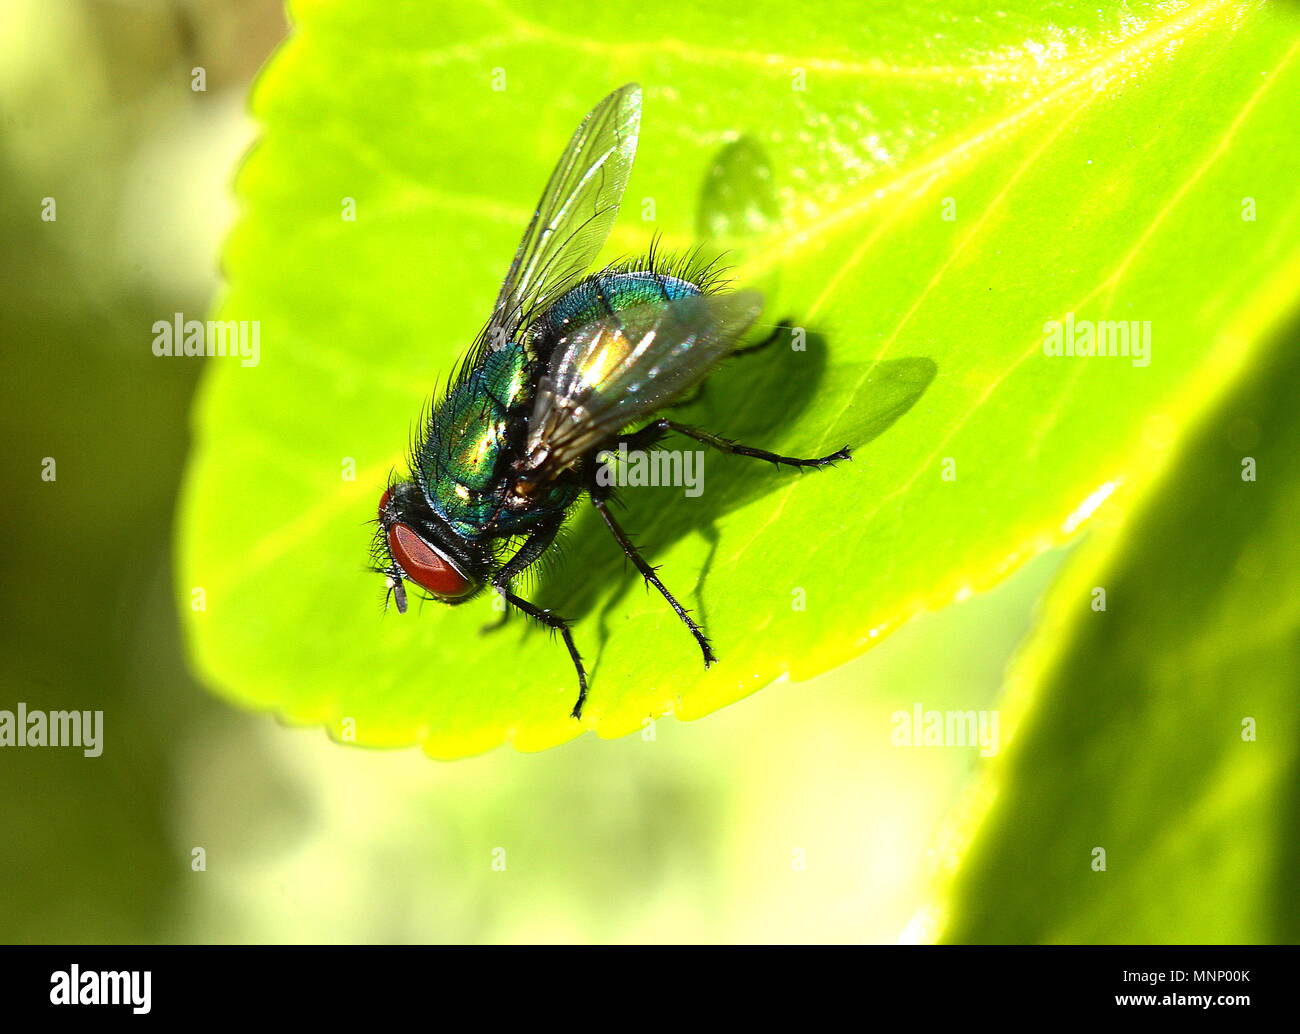 Bluebottle or Blow Fly Stock Photo